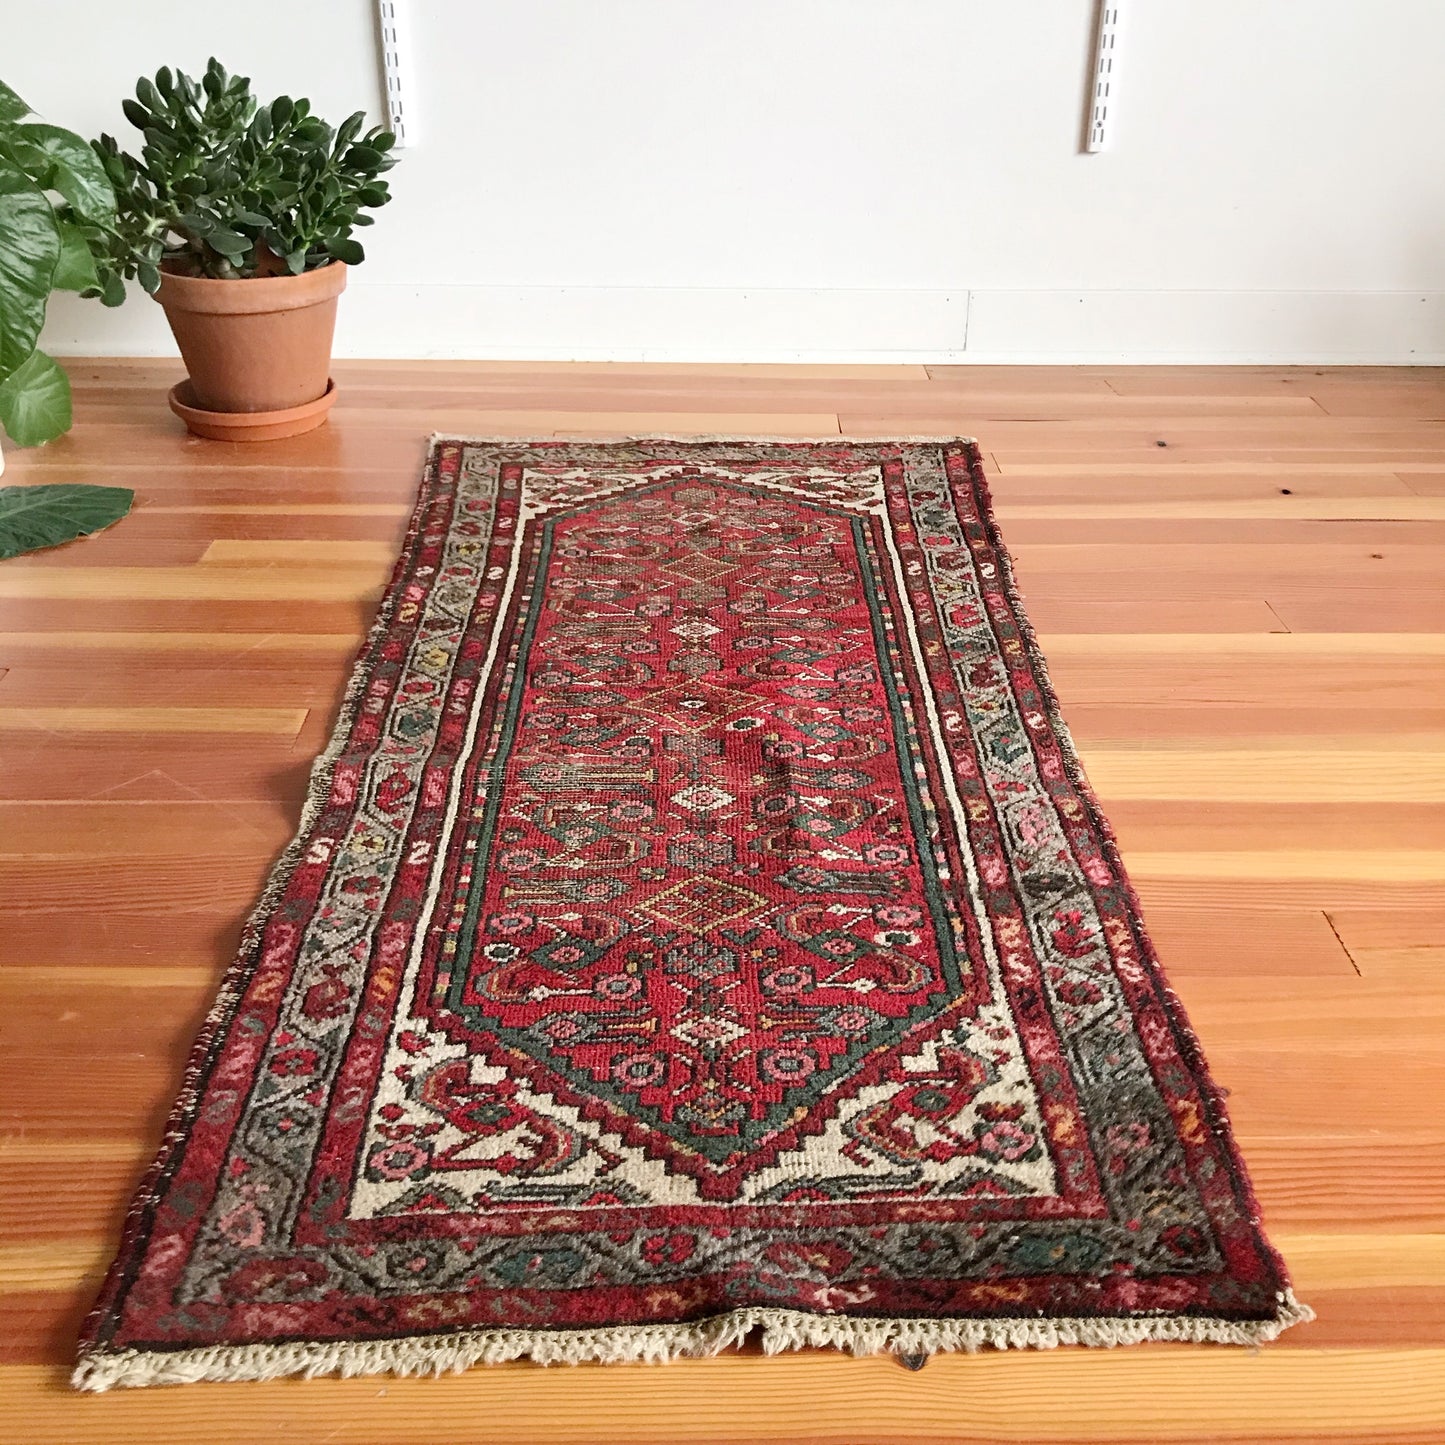 “HANNA” Vintage Hand-knotted Rug (2.4 x 4.10)